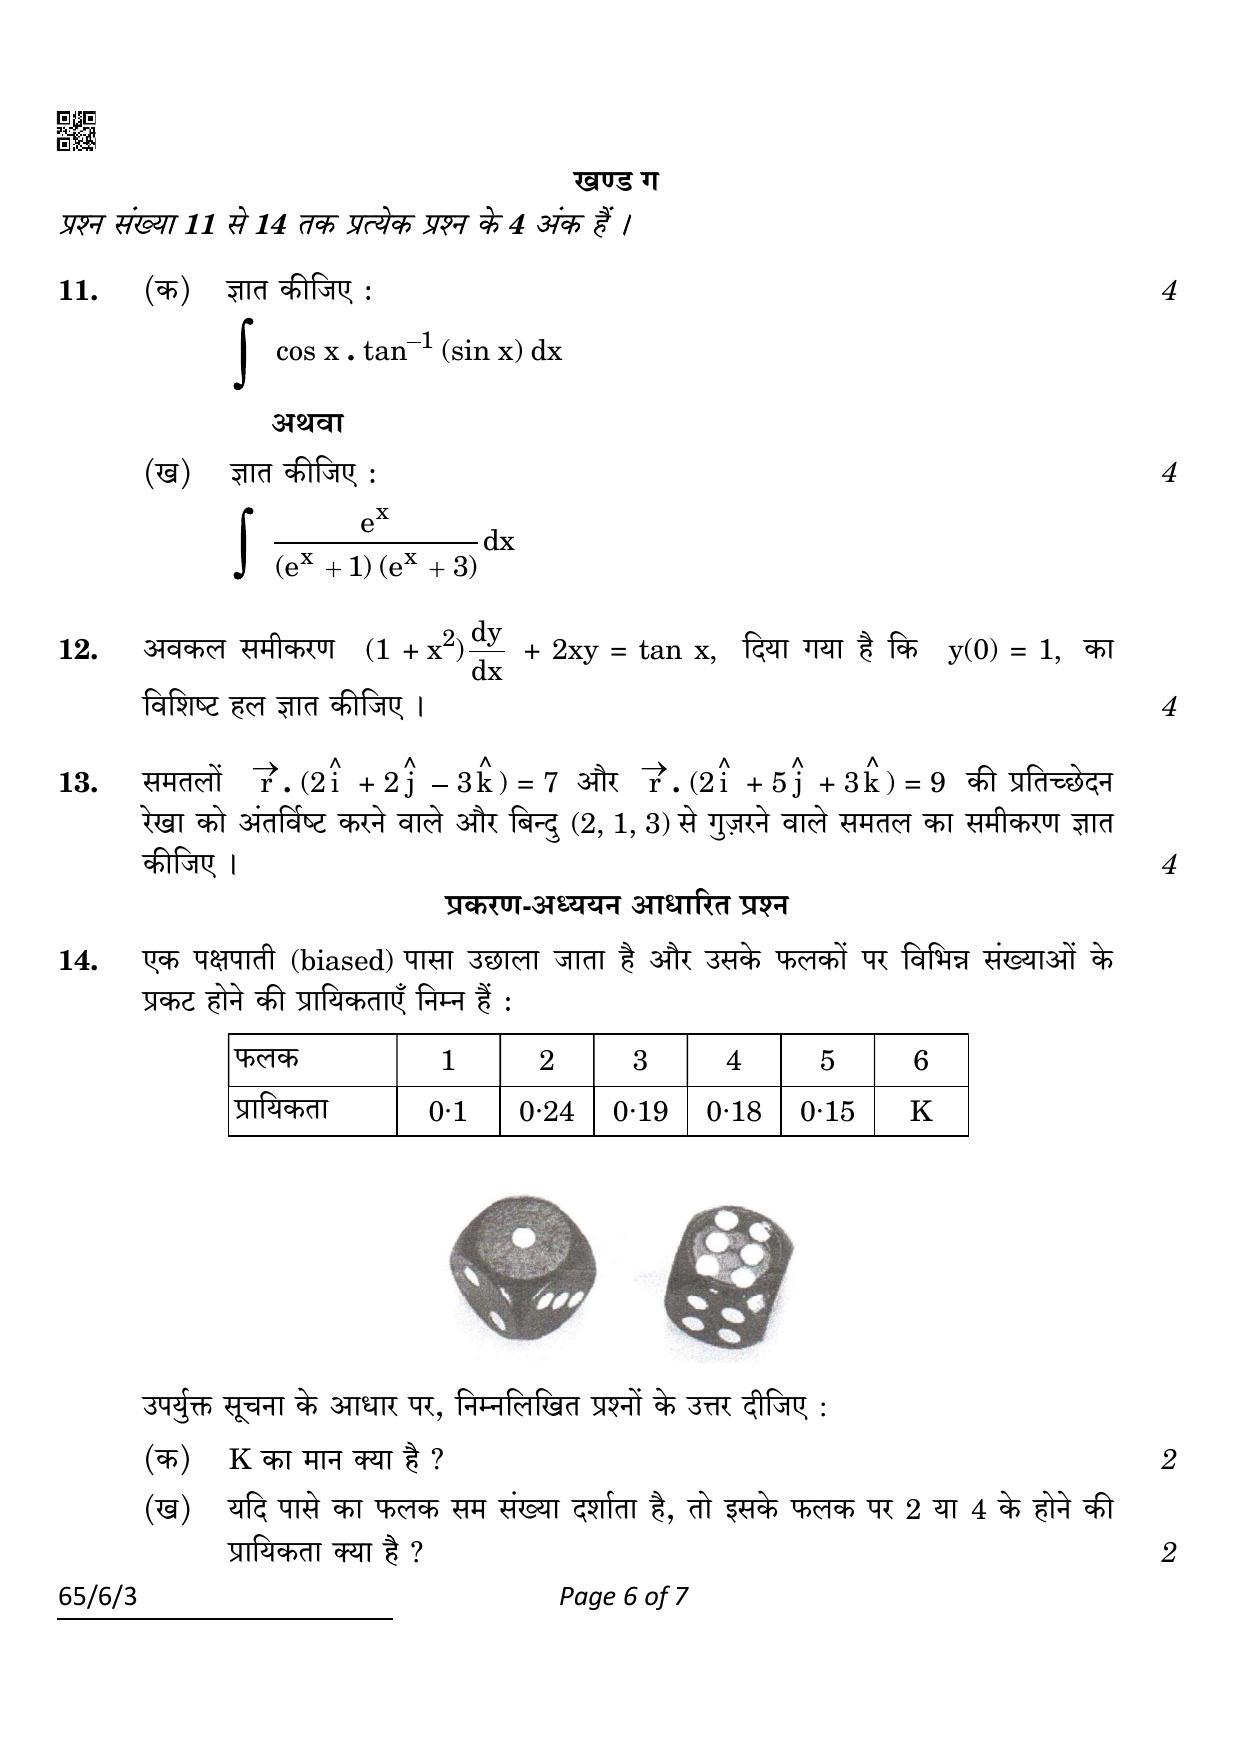 CBSE Class 12 65-6-3 Maths 2022 Compartment Question Paper - Page 6